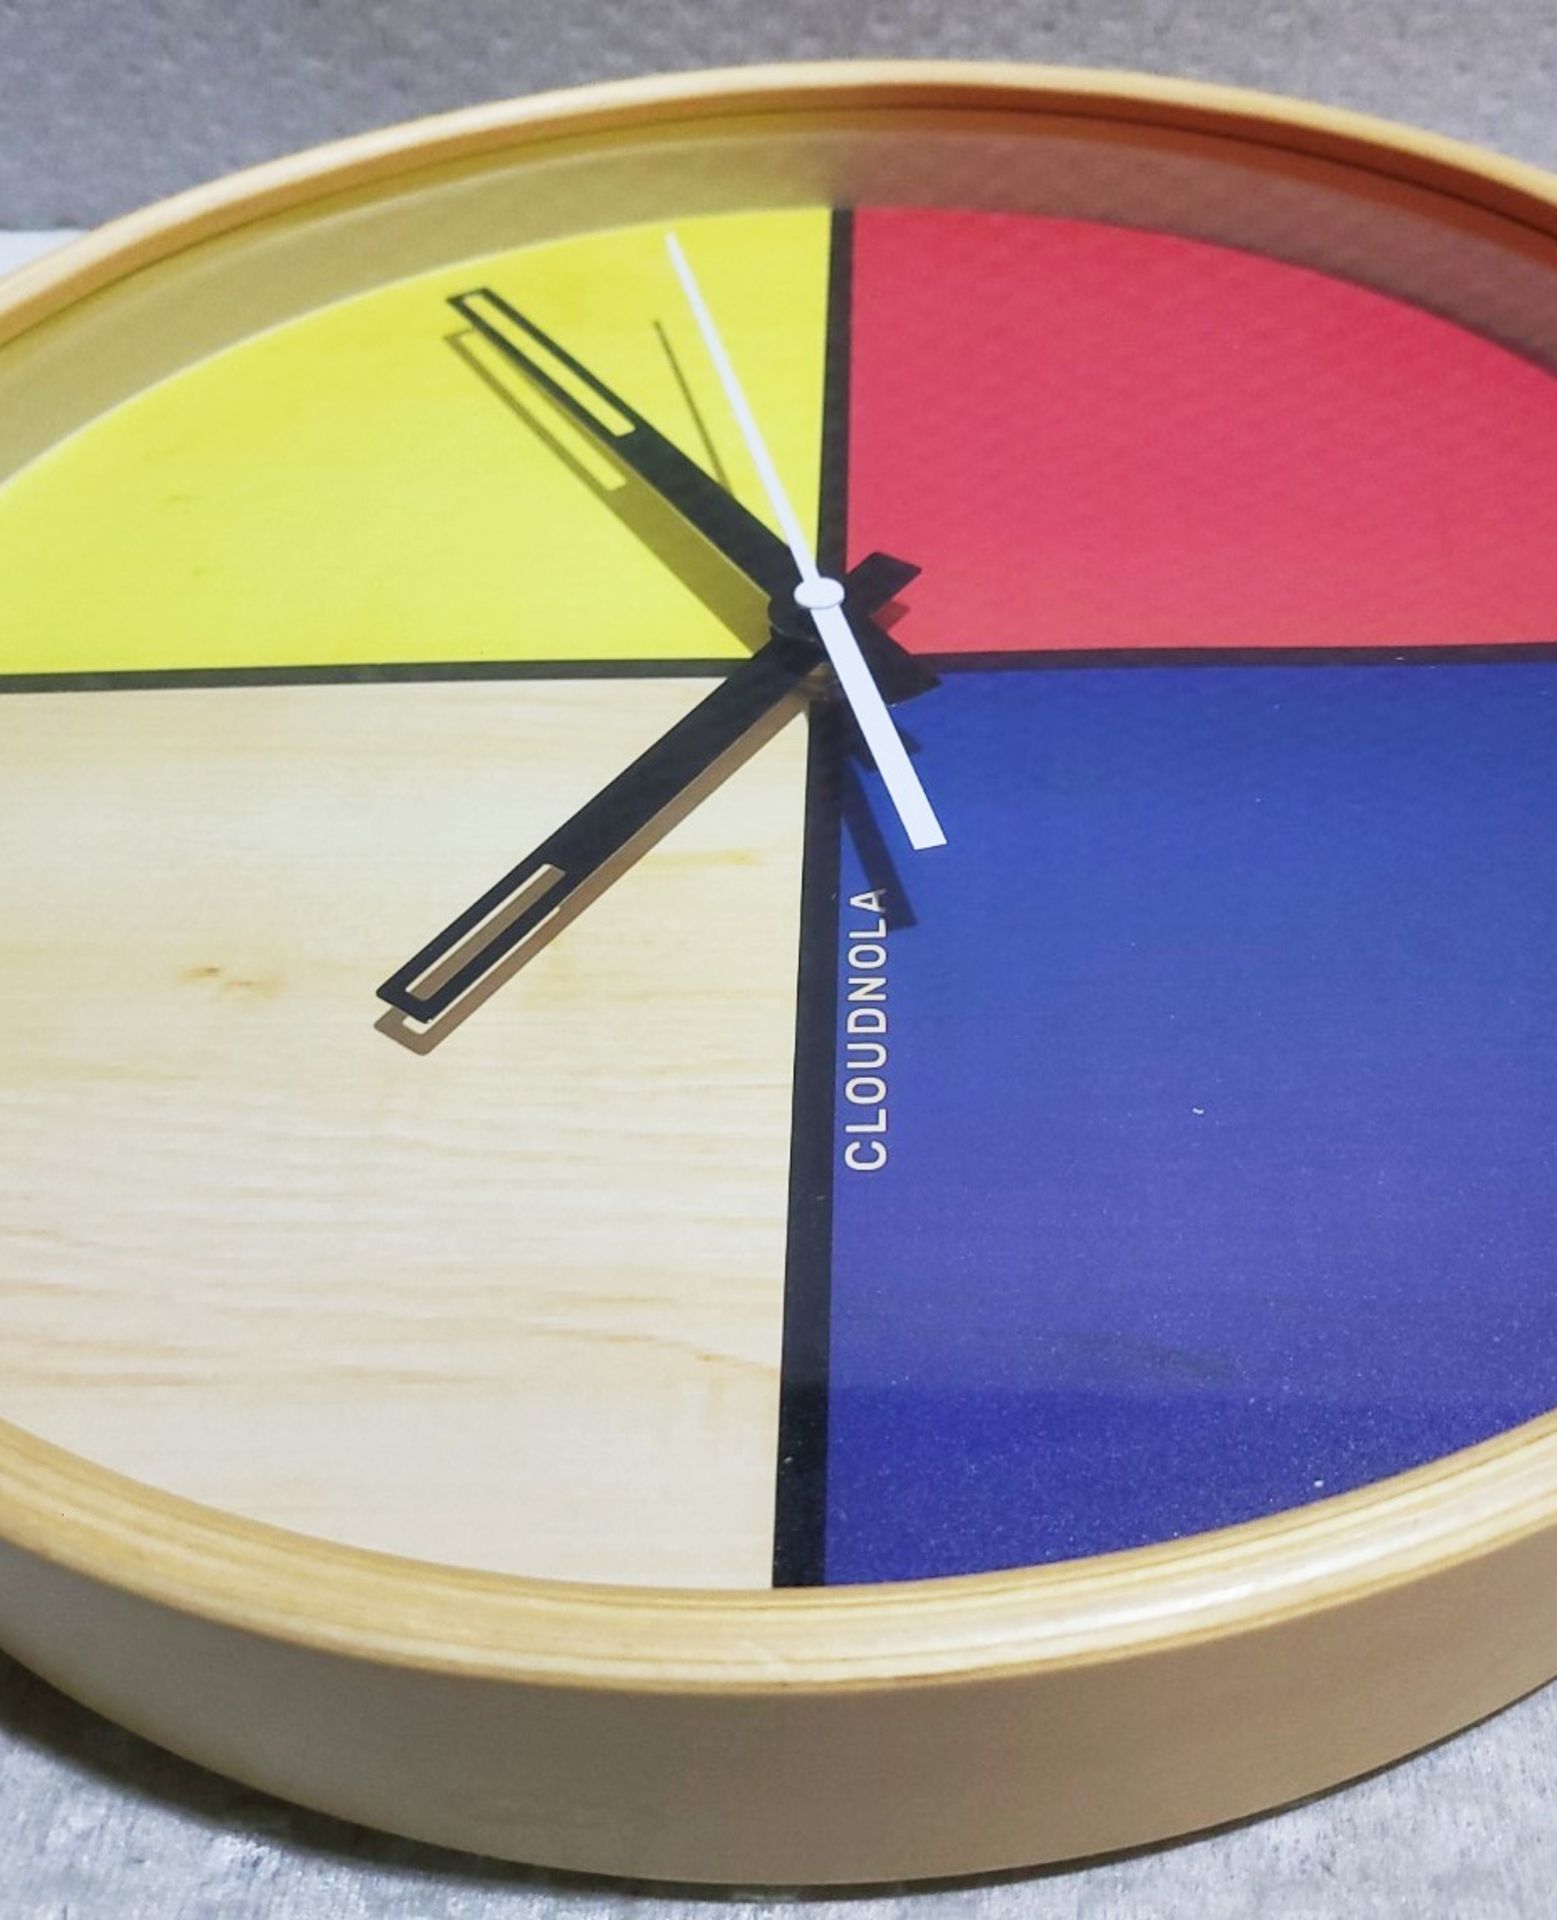 1 x CLOUDNOLA Contemporary Flur Yellow, Red, Blue & Birch Wall Clock With Offset Wooden Rim 30cm - Image 7 of 8